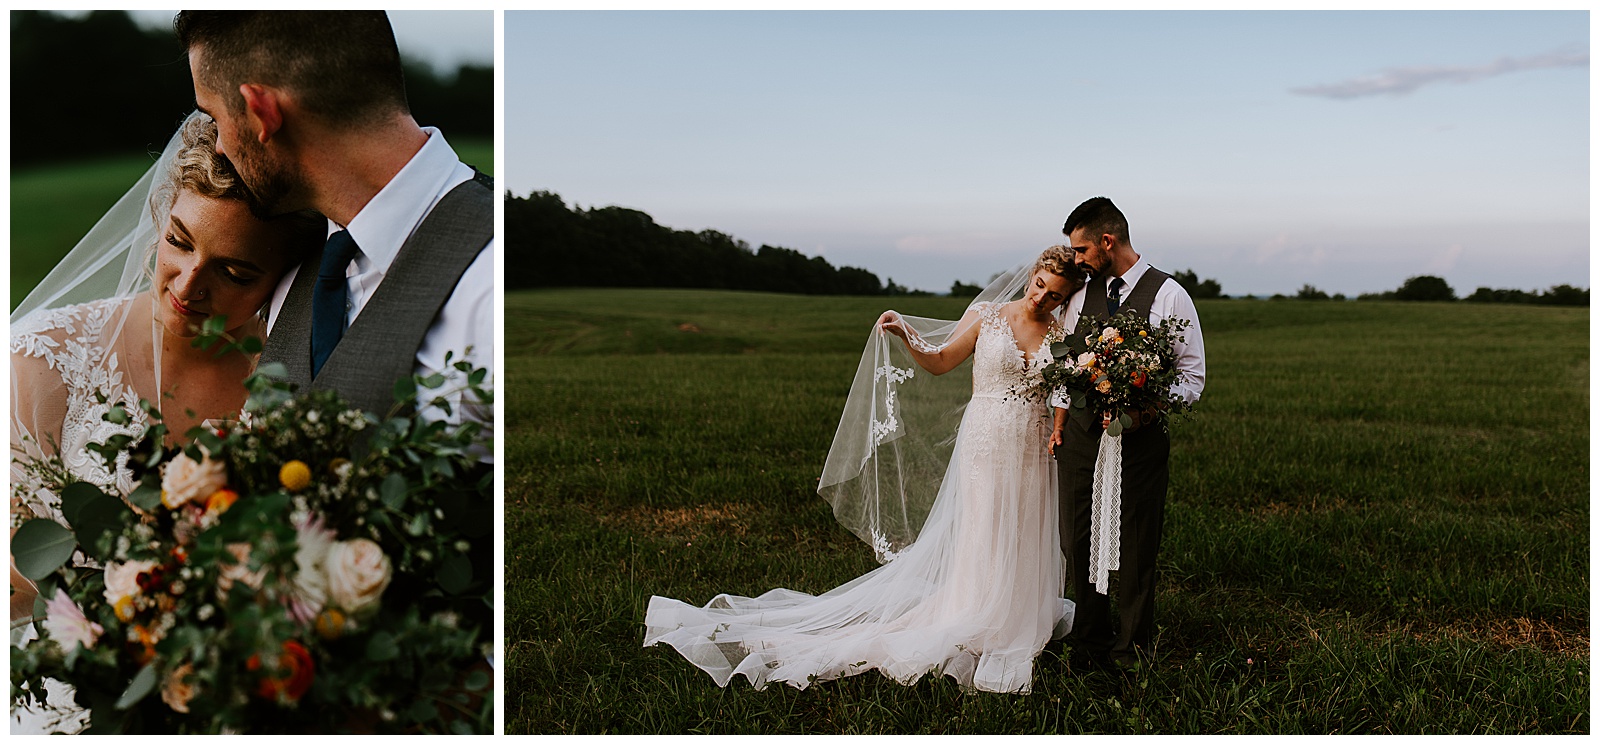 romantic and intimate wedding pictures, pride and prejudice wedding, emotional wedding, emotional bride and groom, sunset wedding photos, dreamy bride and groom portraits, intimate photography, moody wedding portraits